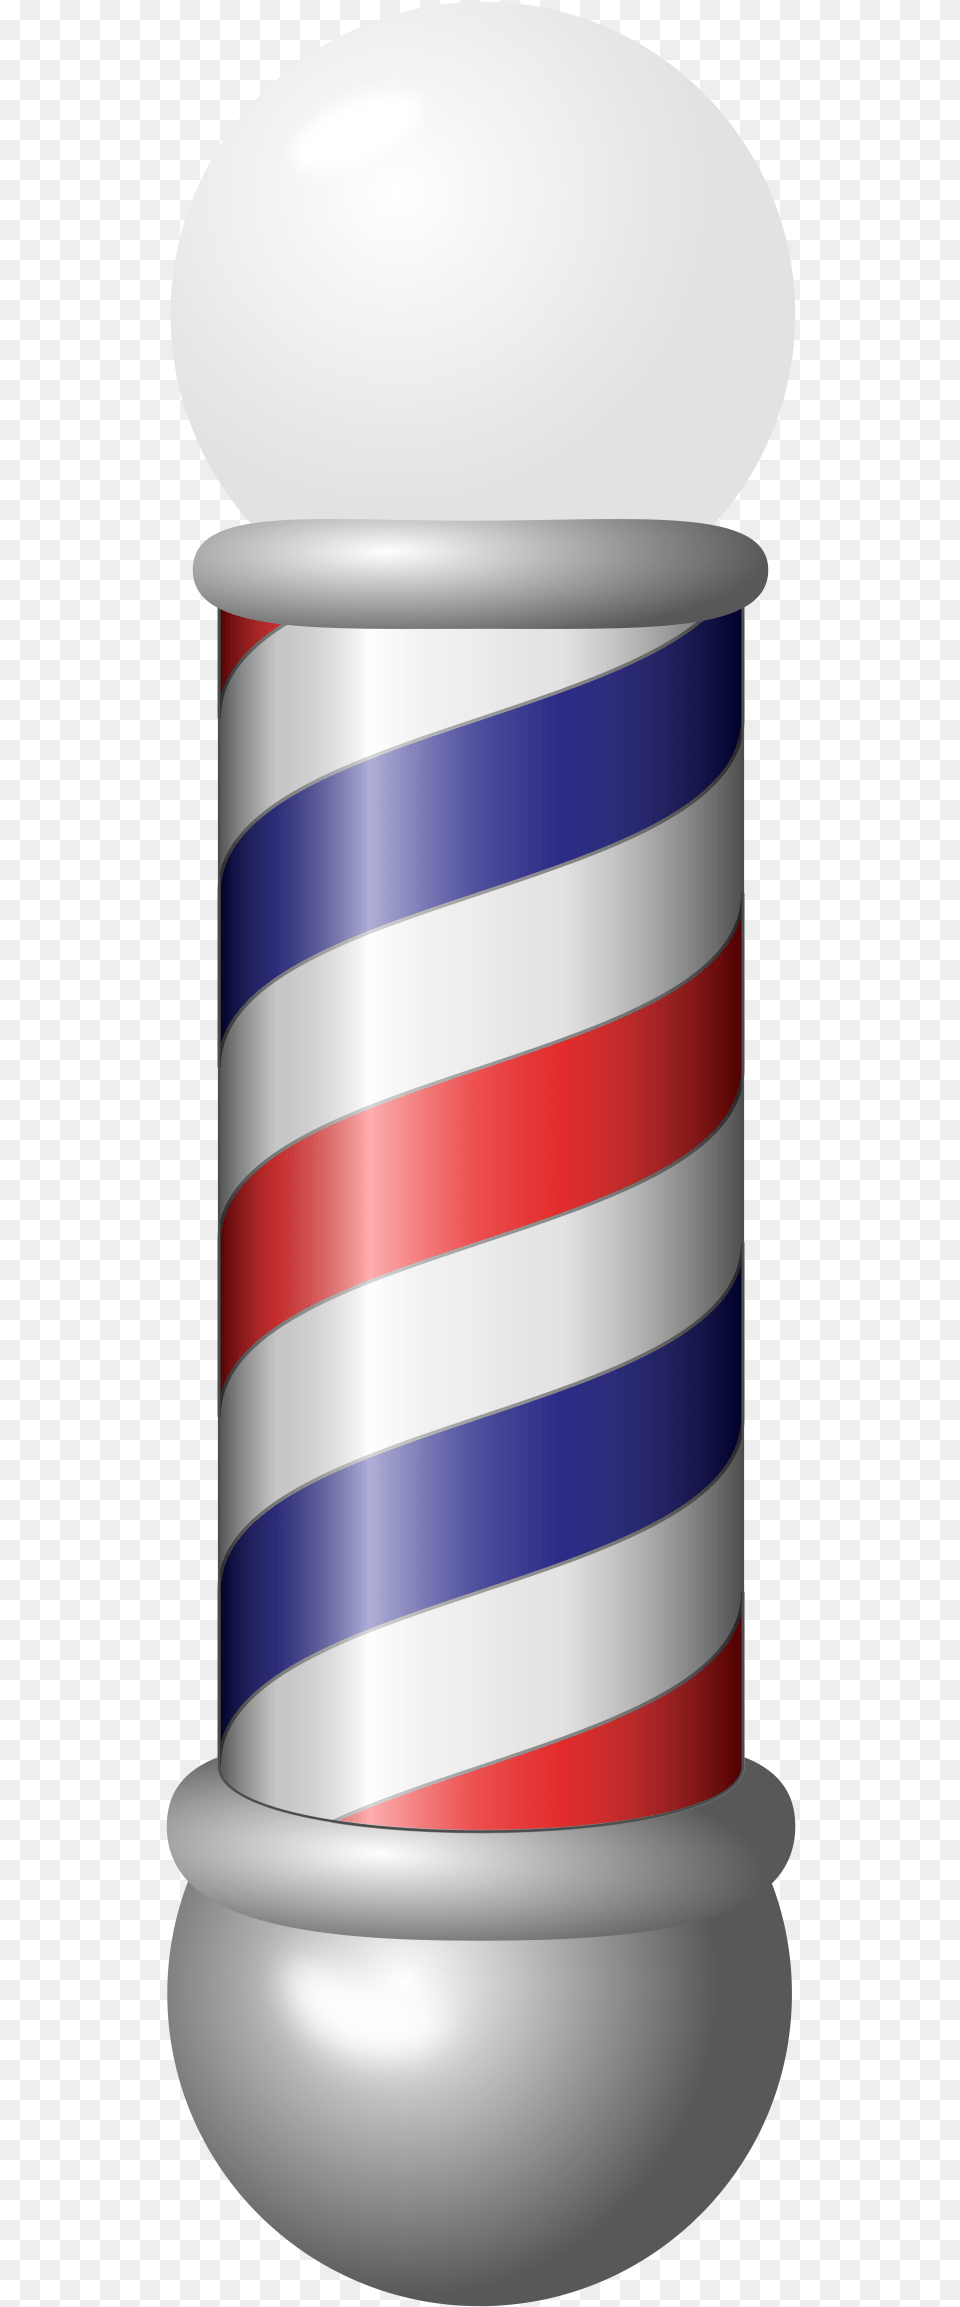 Barber Pole Hd Barber Pole Hd Barber Shop Pole Psd, Dynamite, Weapon, Cylinder Free Png Download